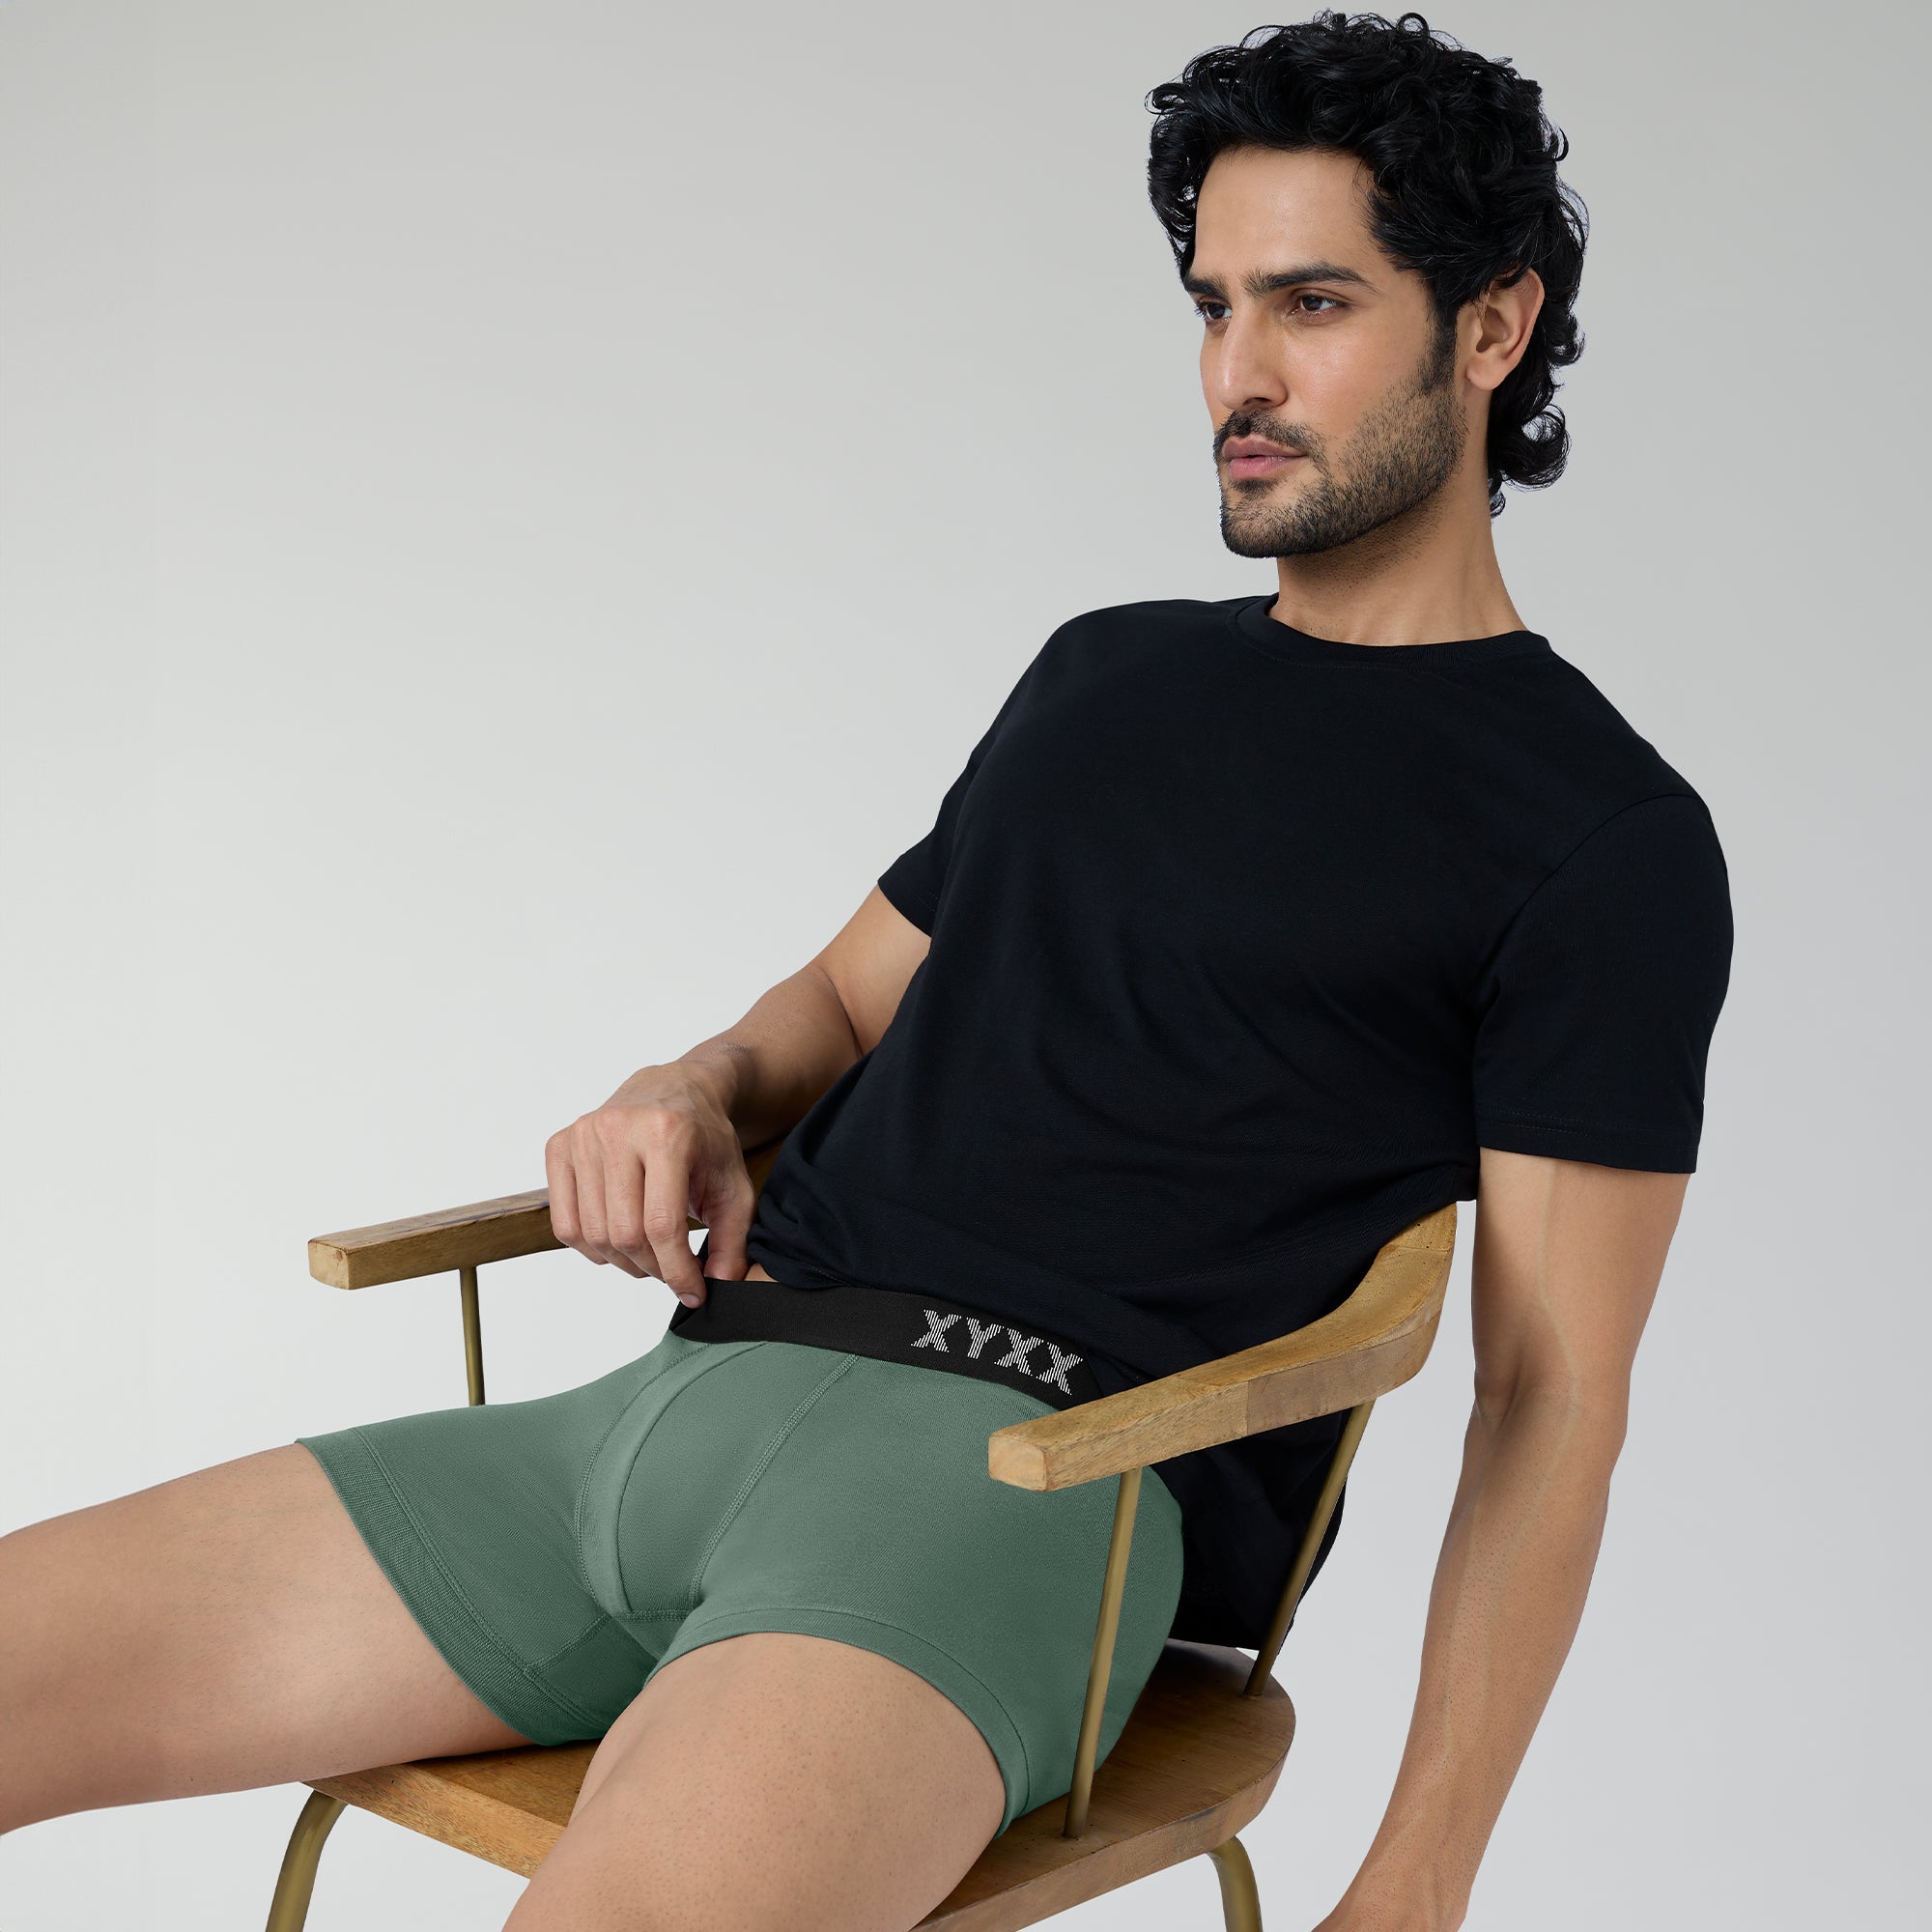 Pace Cotton Rib Trunks Olive Green